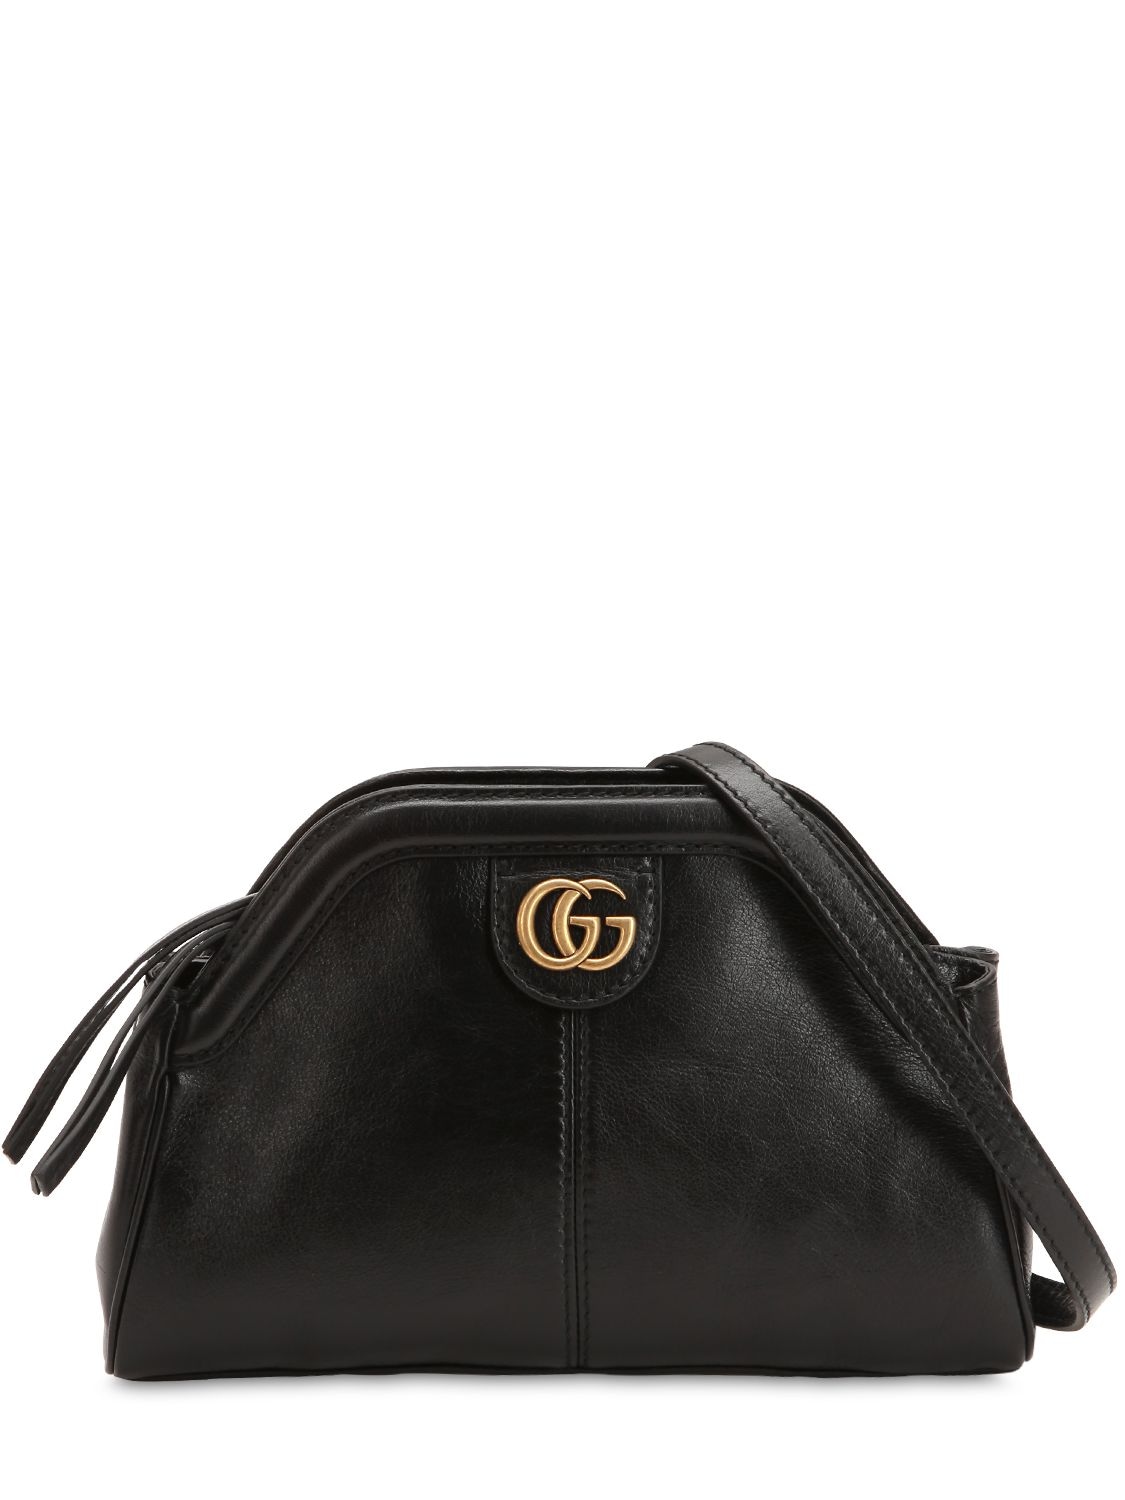 Gucci Leather Top Handle Bag In Black